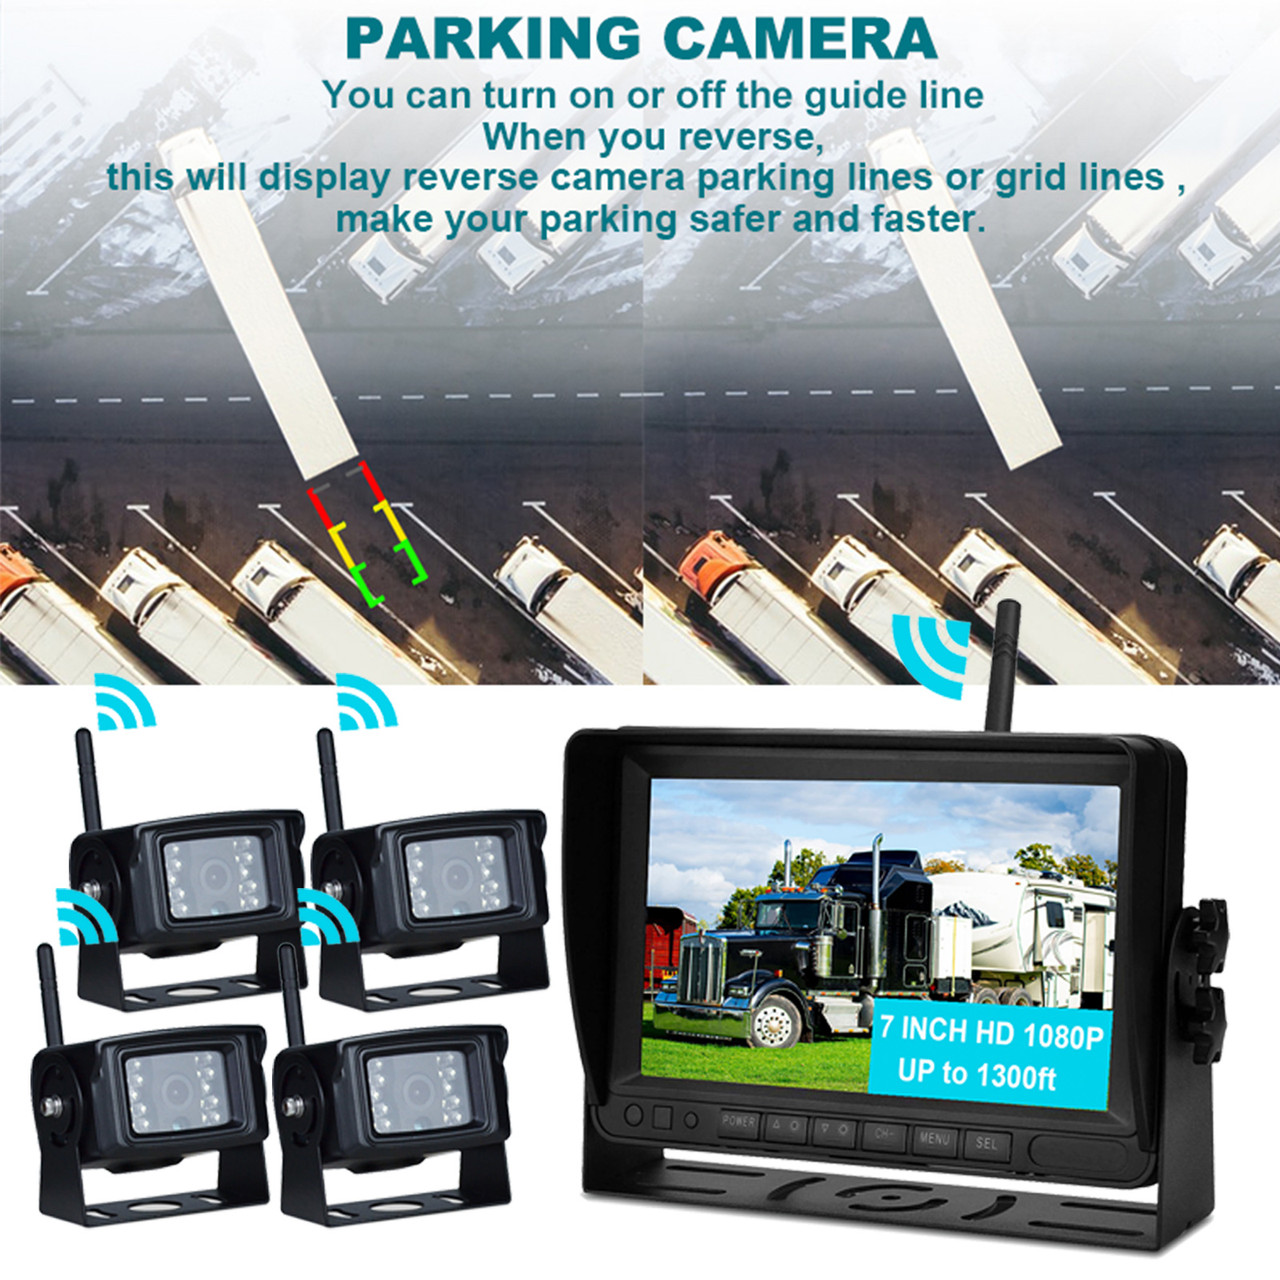 7" Display AHD 1080P Wireless 4CH Rear View Backup Camera Kit for Truck Trailer